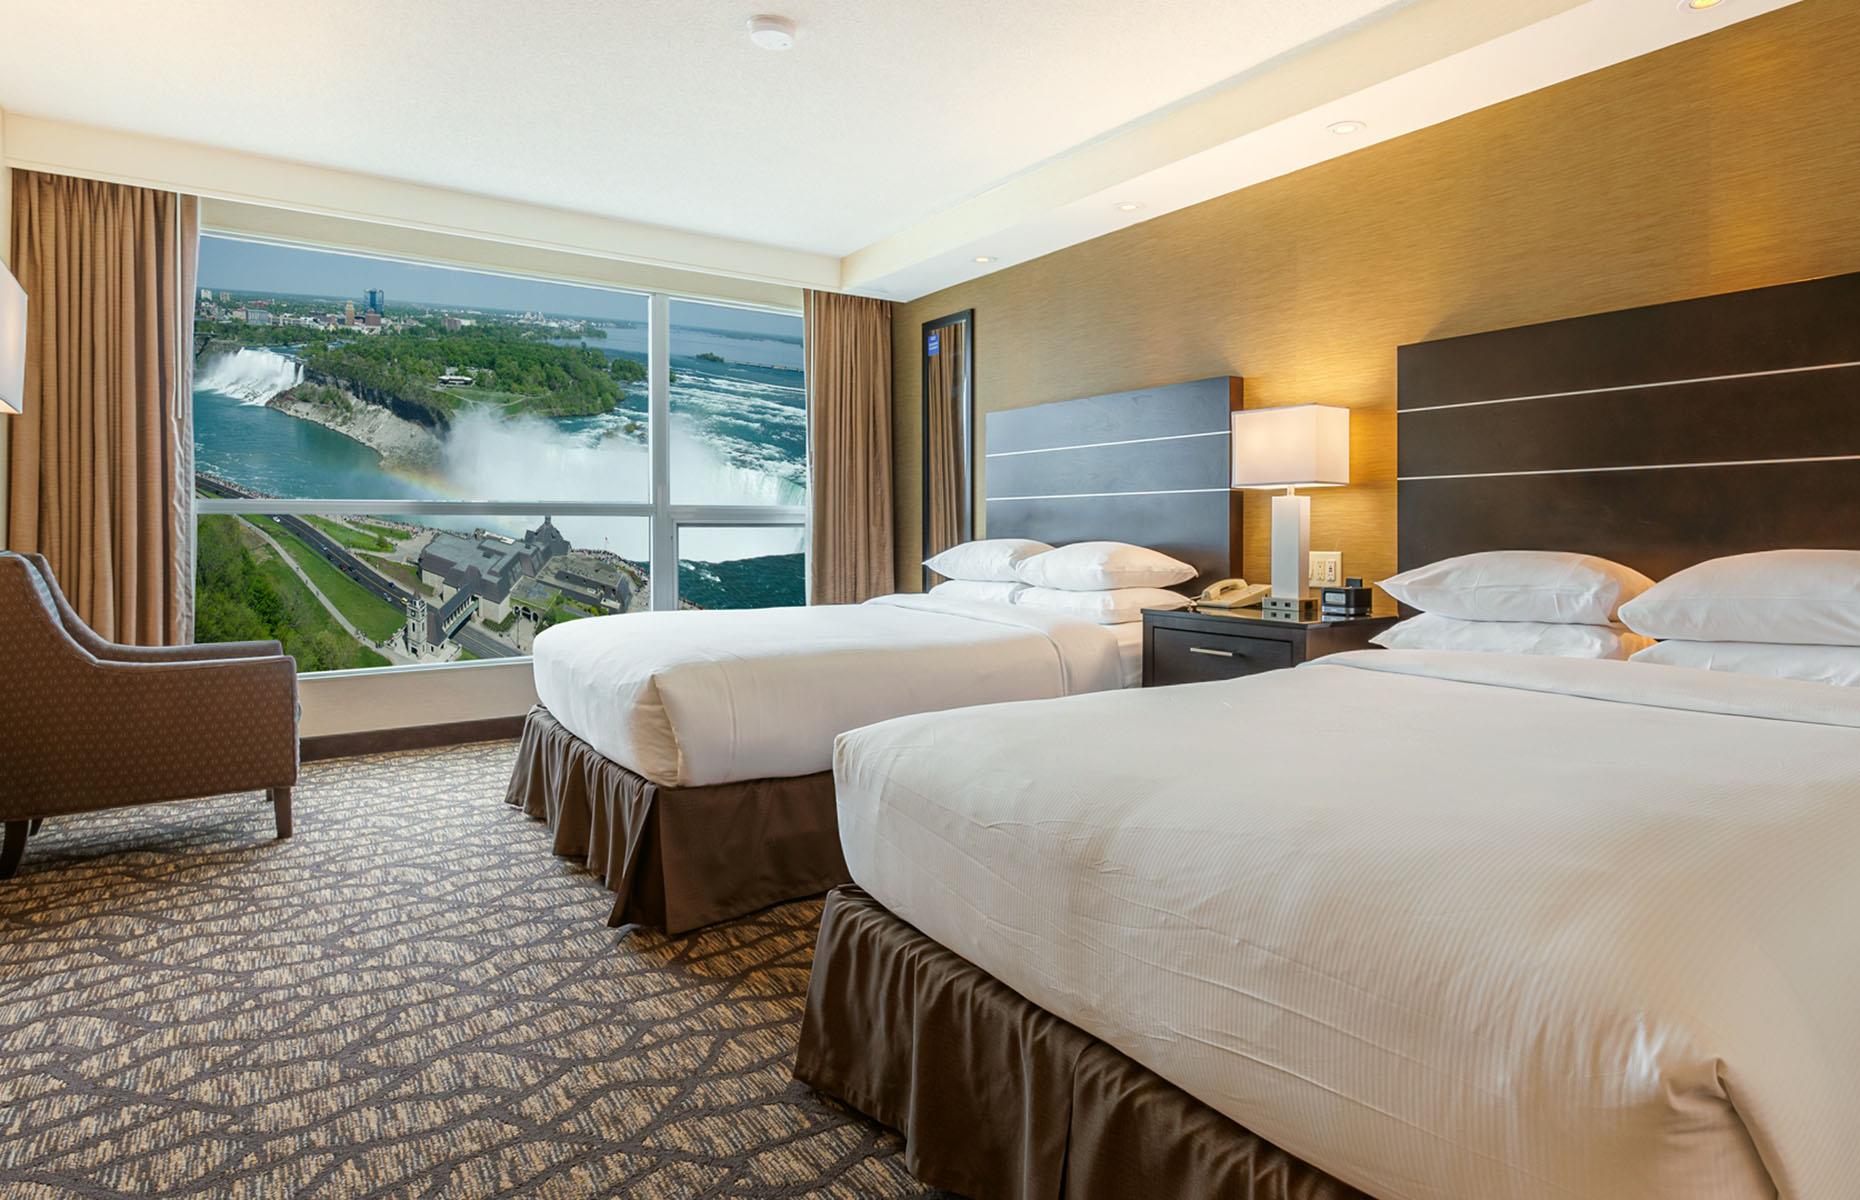 <p>For arguably the best views, stay at the 42-floor <a href="https://embassysuitesniagara.com/closest-hotel-to-niagara-falls.php?gad_source=1&gclid=CjwKCAiAu9yqBhBmEiwAHTx5pylShjgNTXqCwooLEMaR7jAvWbB6PmWr6u37O8eGWU3NIBKqE0qU6hoCzTgQAvD_BwE">Embassy Suites by Hilton</a>, located just 100 yards from the natural wonder. The high floor, two-room suites are super spacious, with two double beds, a living room area complete with sofa bed and flatscreen TV, bath and shower room, desk, fridge, coffee machine, microwave, wet bar and the most incredible view you’ve probably ever experienced from a hotel room.</p>  <p>Breakfast is served with a view at the Keg Steakhouse and Bar, located on the ninth floor. Enjoy your eggs while you watch the sunrise over the falls. It’s spectacular.</p>